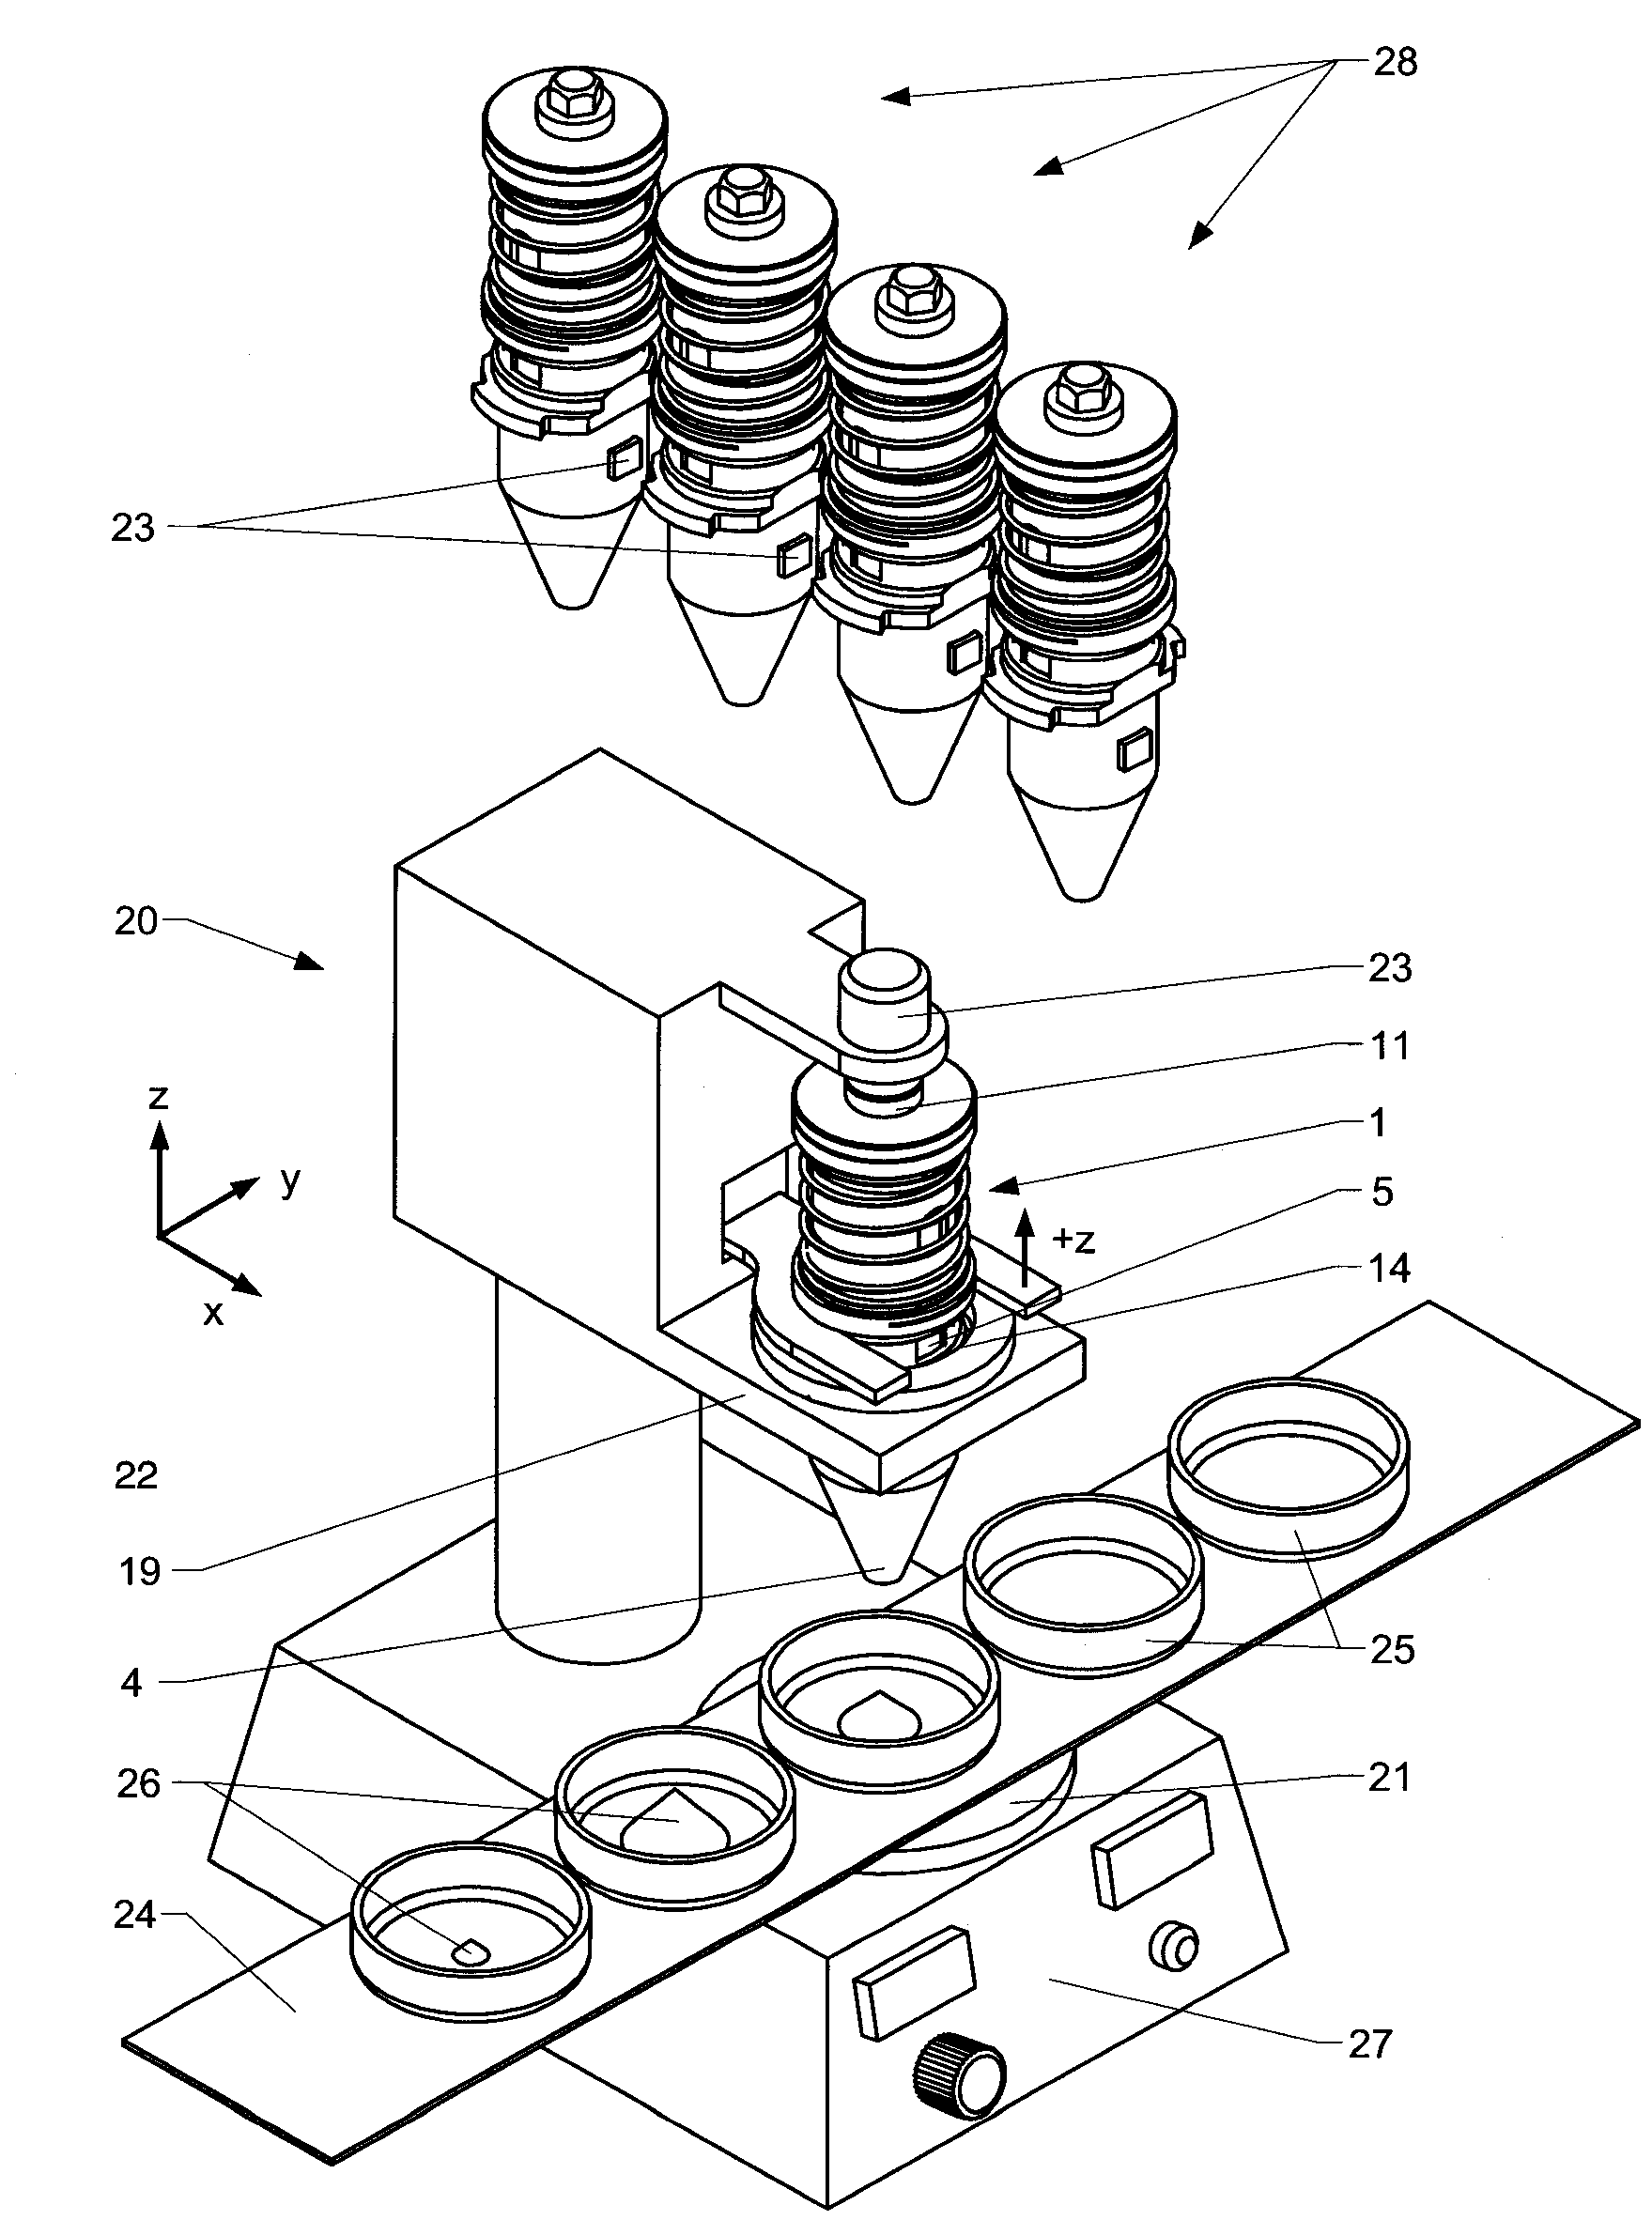 Apparatus And Method For Storing And Dispensing Material, Especially In Micro Quantities And In Combination With Limited Starting Amounts